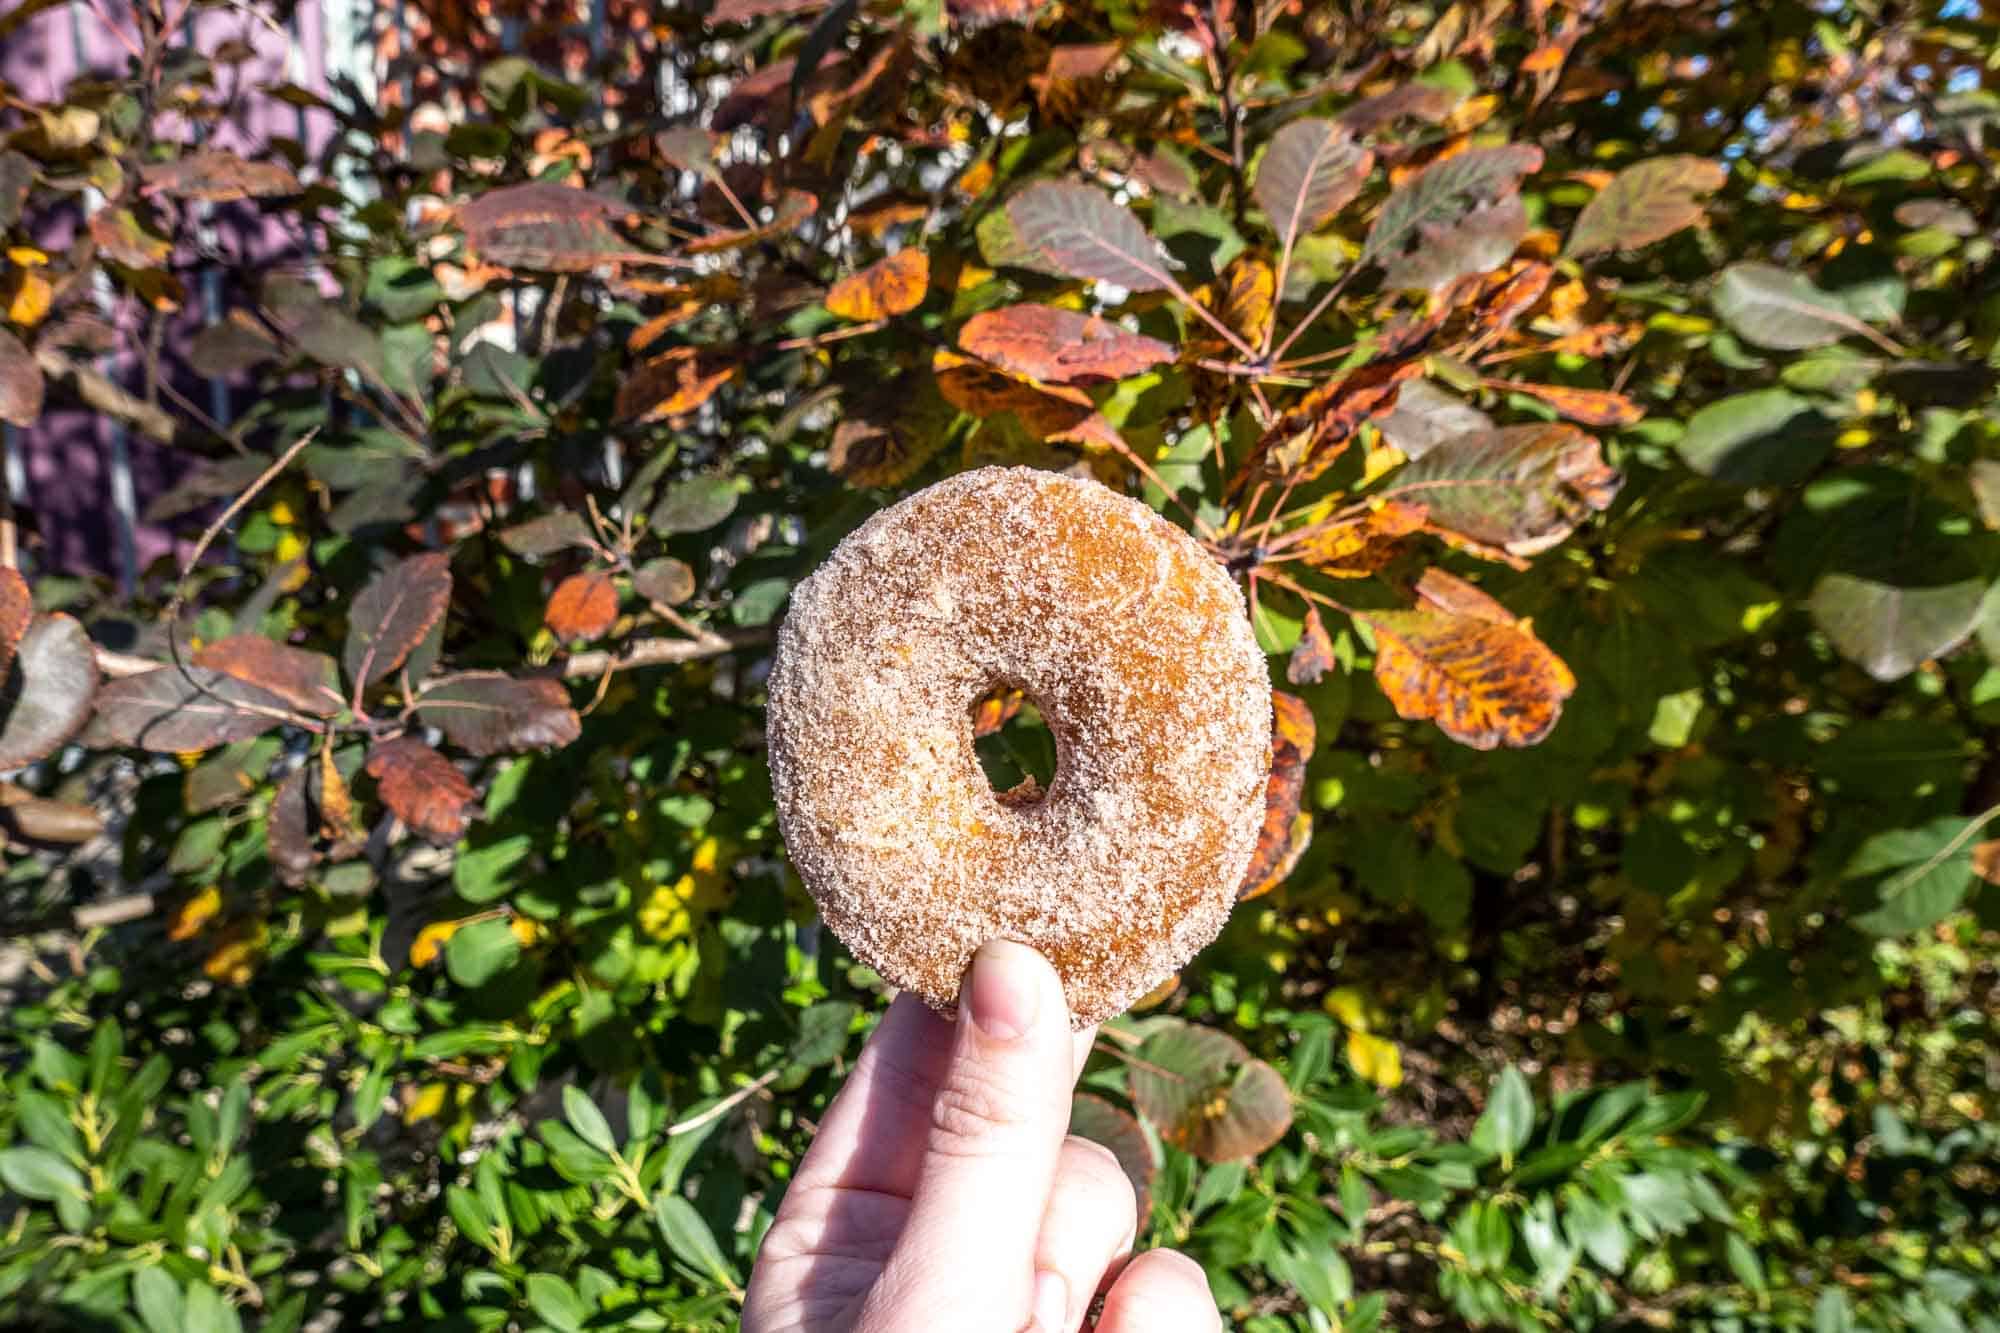 Hand holding a cinnamon-sugar dusted donut in front of fall foliage 